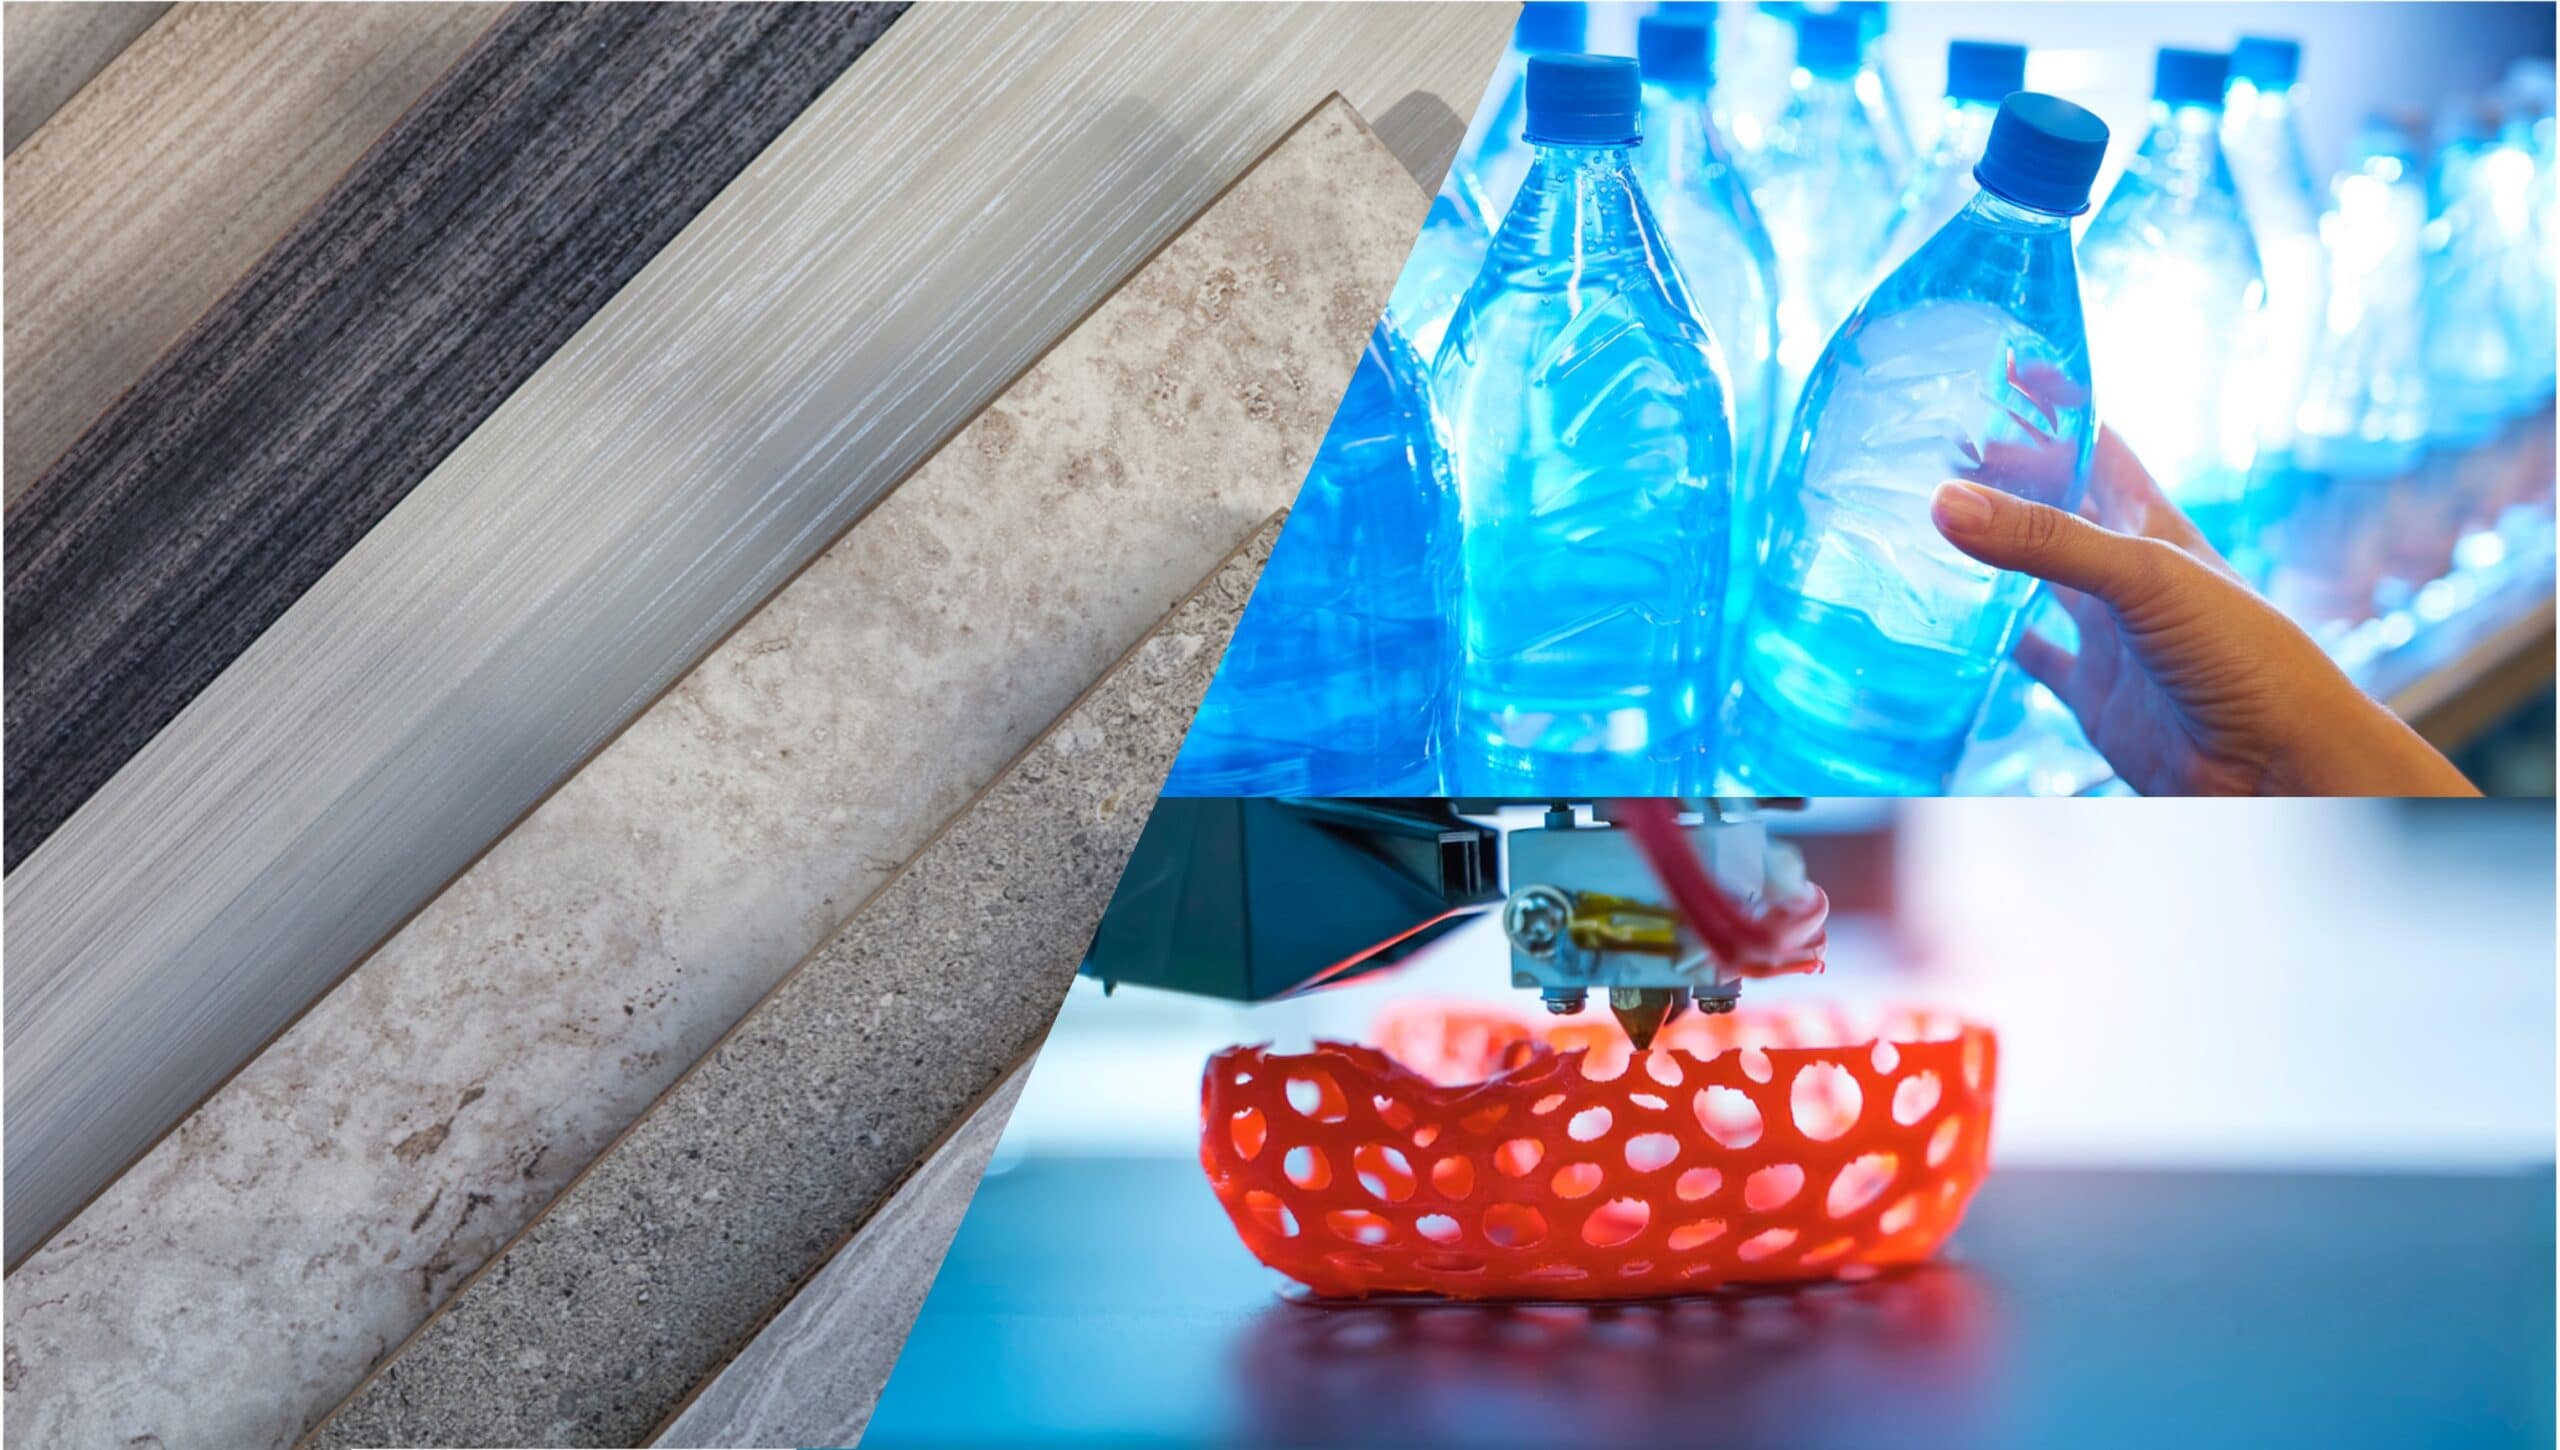 Composite image of hemp building materials, clear water bottles, and a red bowl being 3D printed.